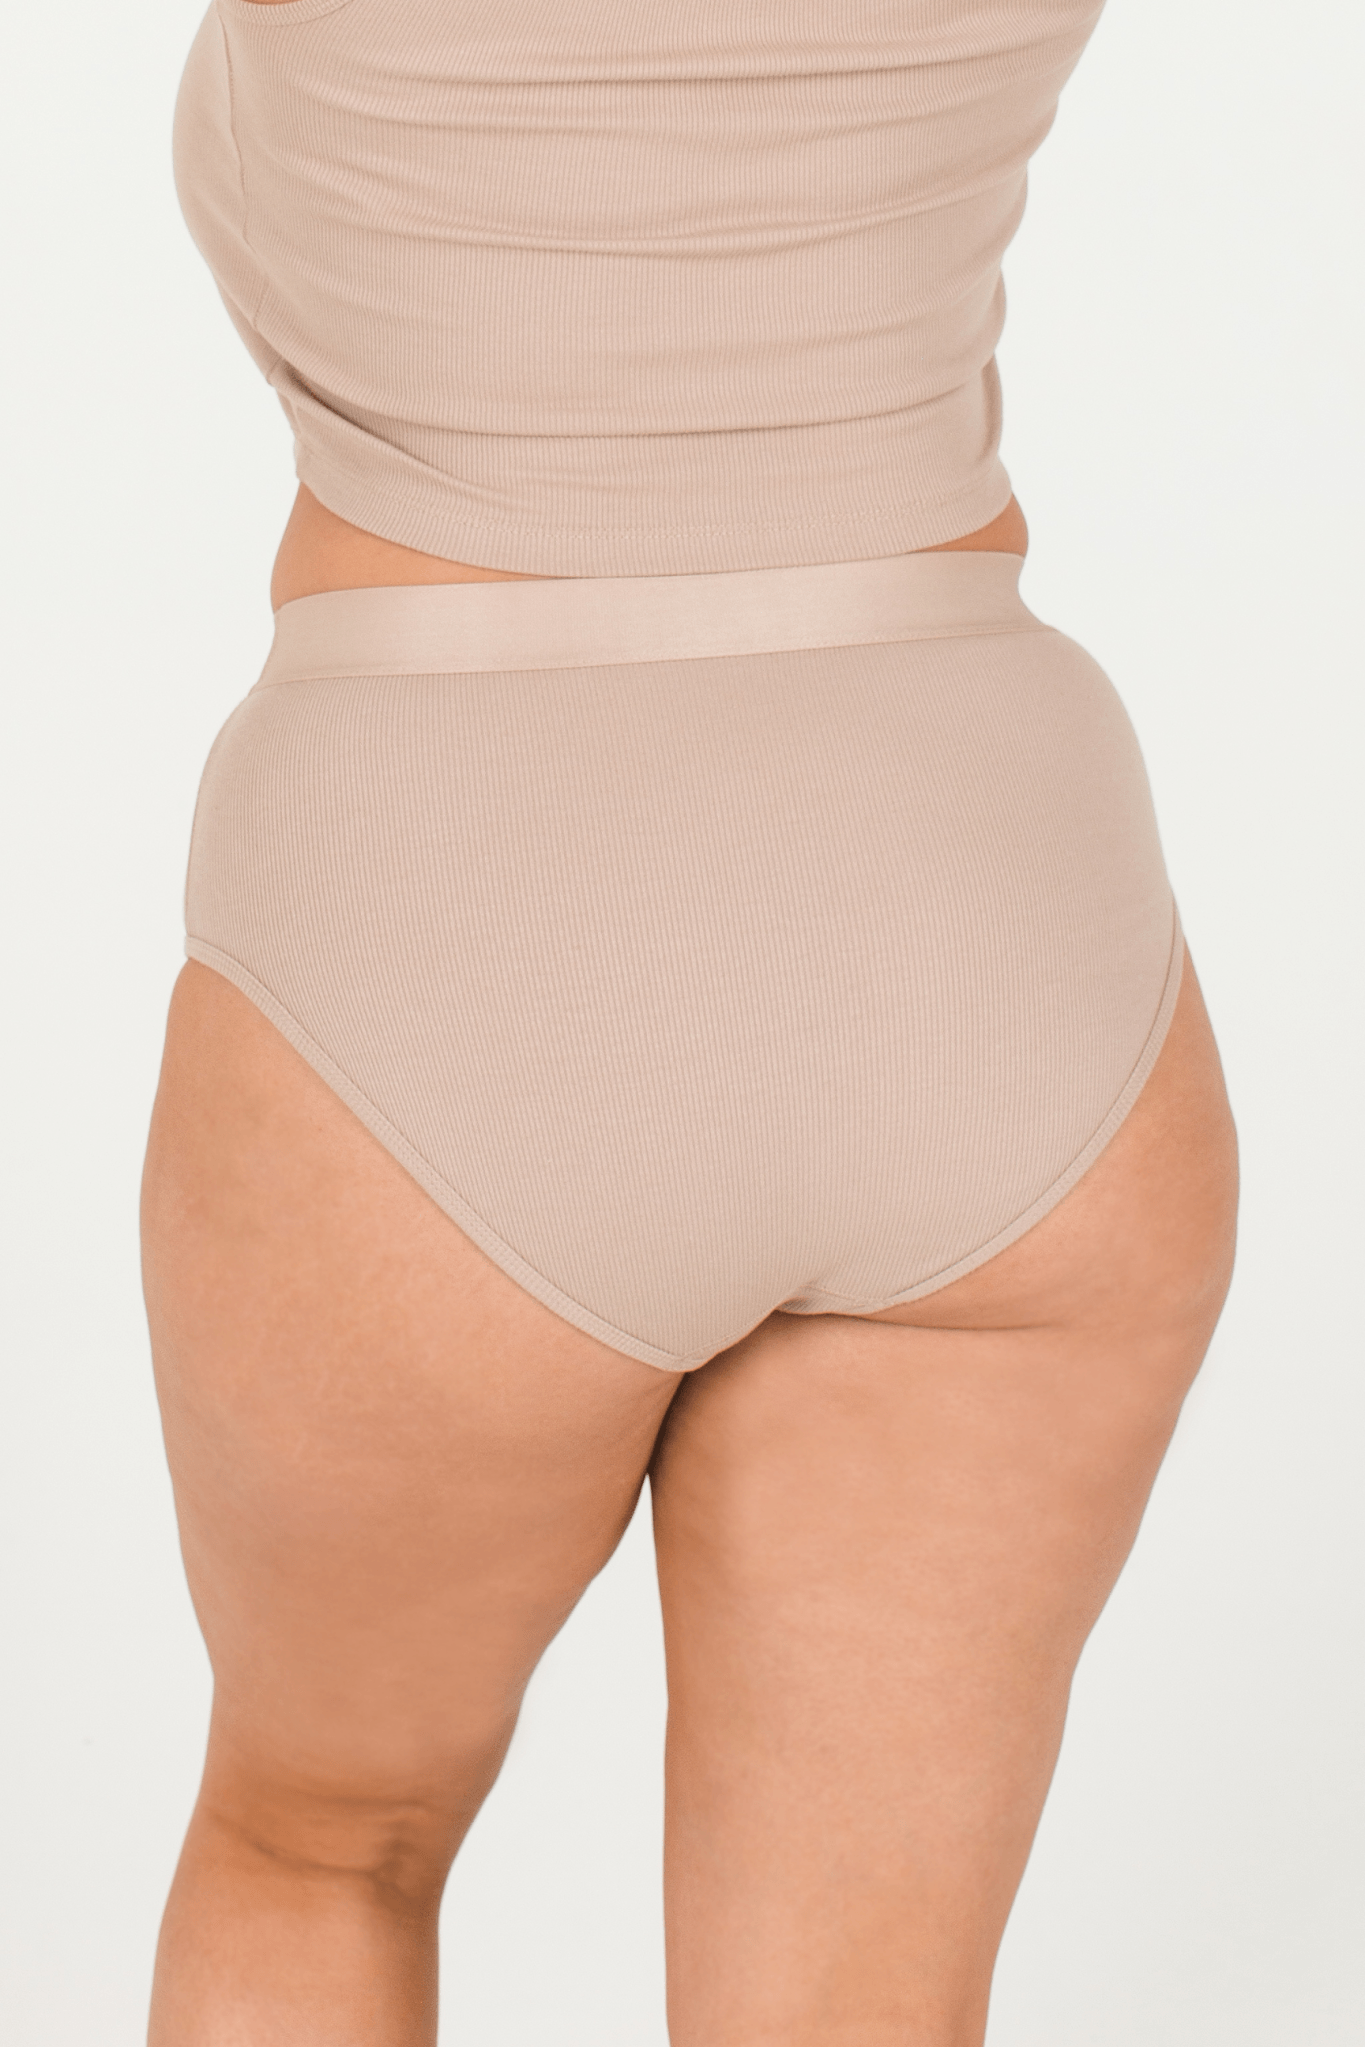 Women's Seamless Rib Panties 5 Pack, High Waist Stretchy Ribbed Everyday  Underwear, Breathable Cheeky Tummy Control Briefs, 01#5 Pack, Medium :  : Clothing, Shoes & Accessories